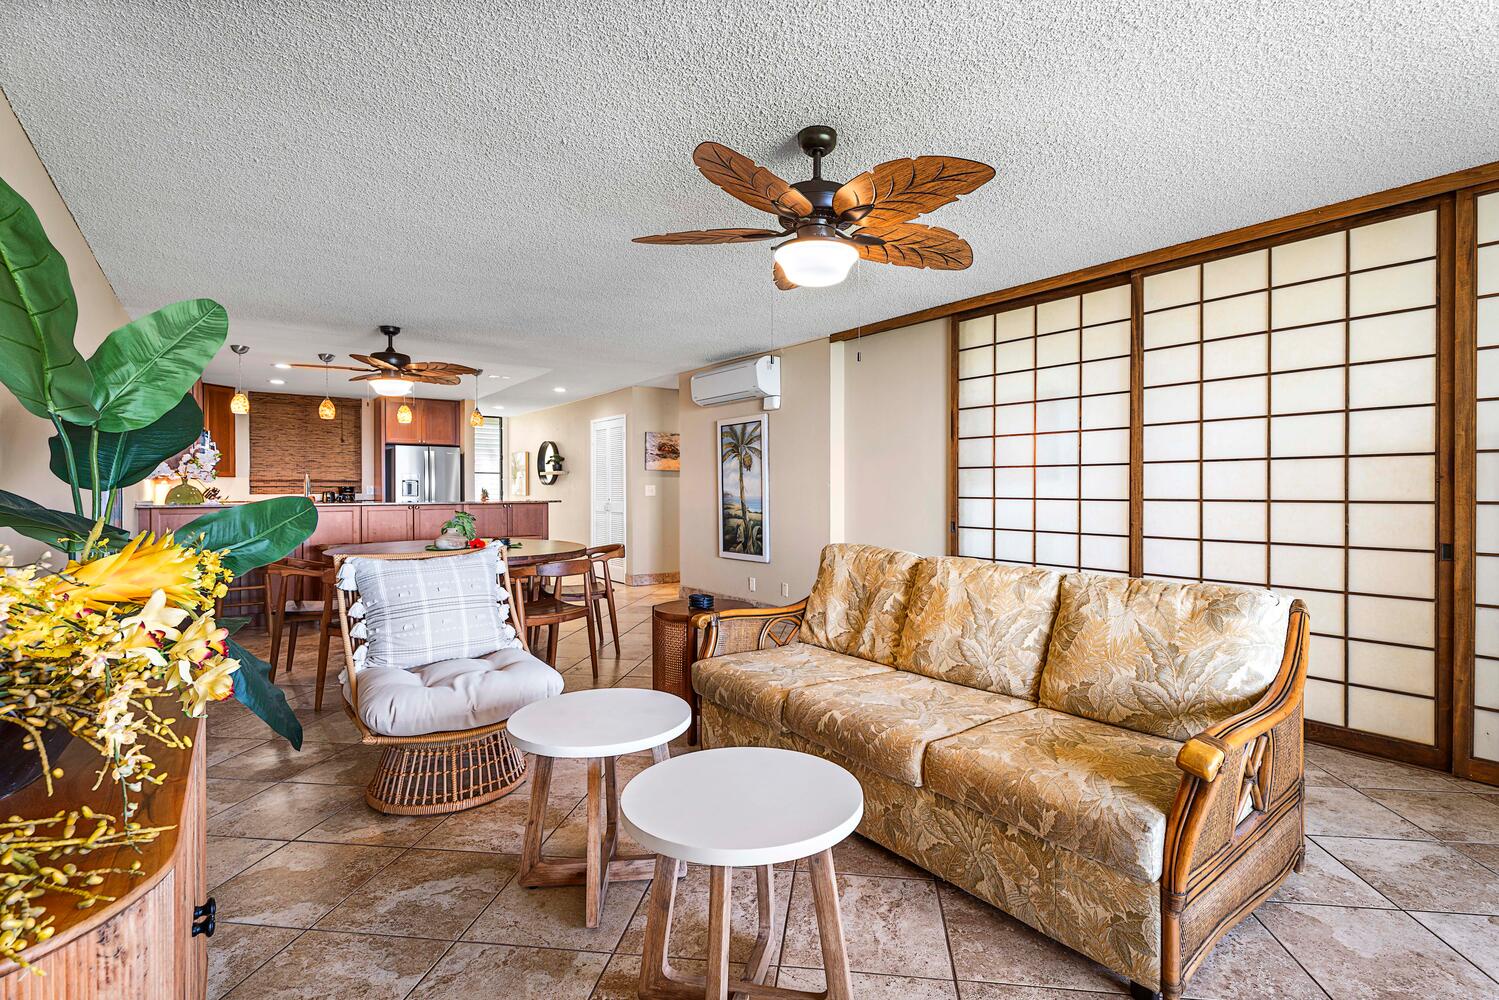 Kailua Kona Vacation Rentals, Keauhou Kona Surf & Racquet 1104 - Retreat in the living area with plush couches and occasional seats